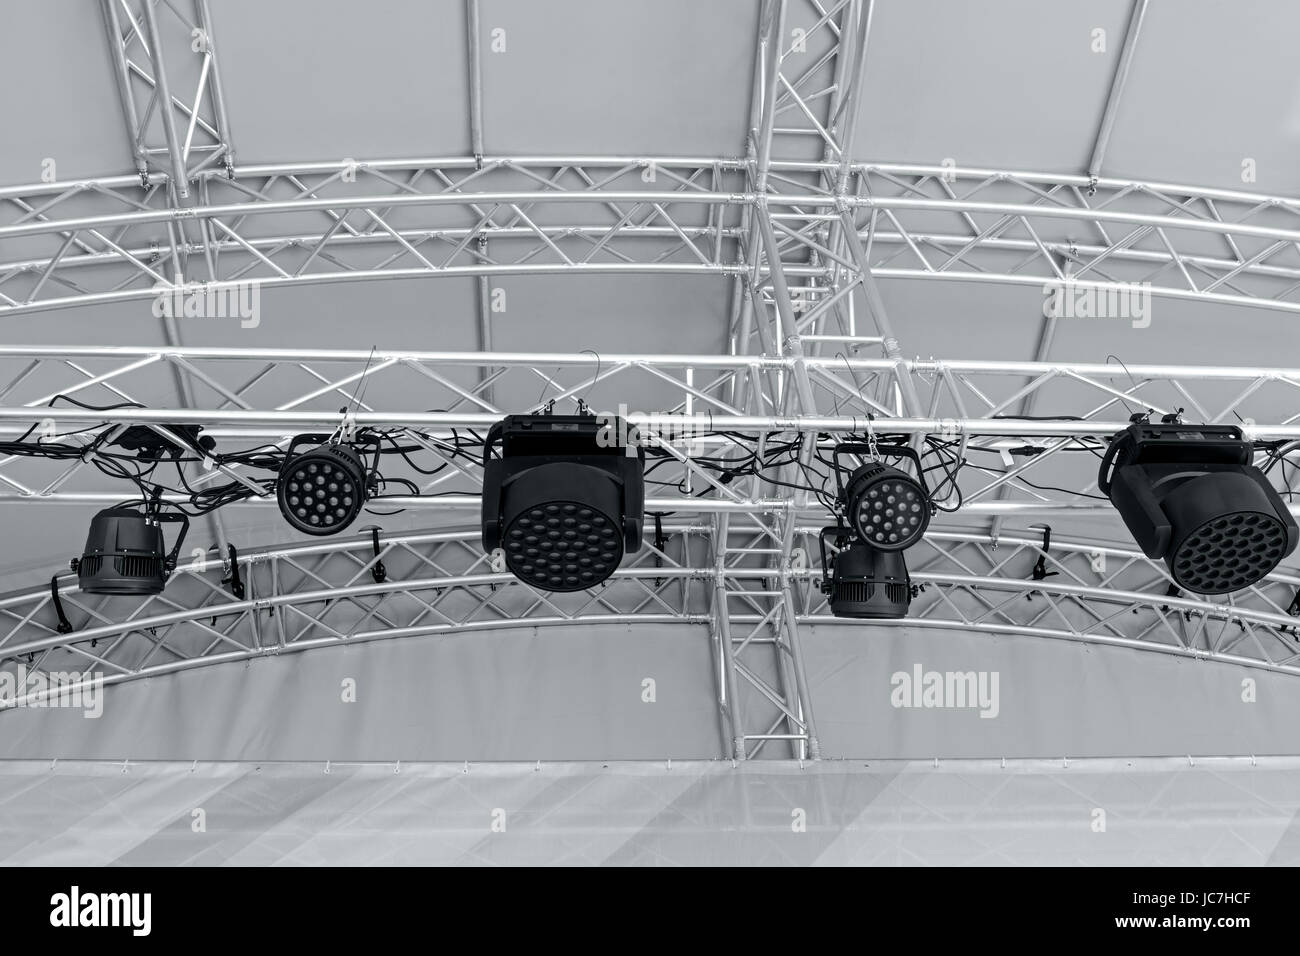 spotlights on stage lighting rig. stage light equipment before concert. Stock Photo